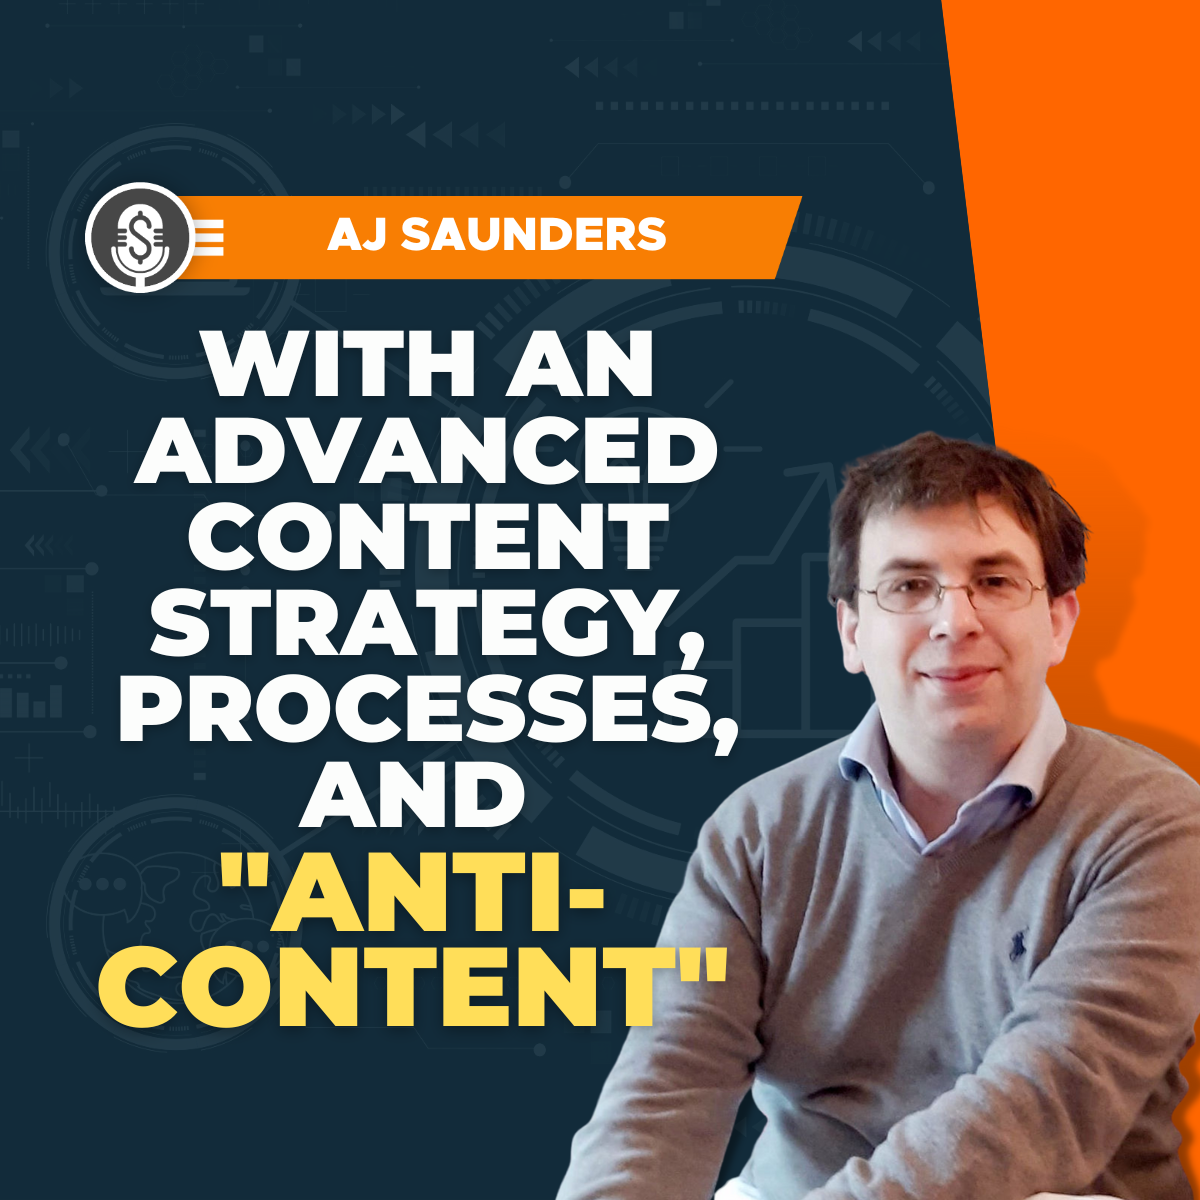 AJ Saunders with an advanced content strategy, processes, and "anti-content"